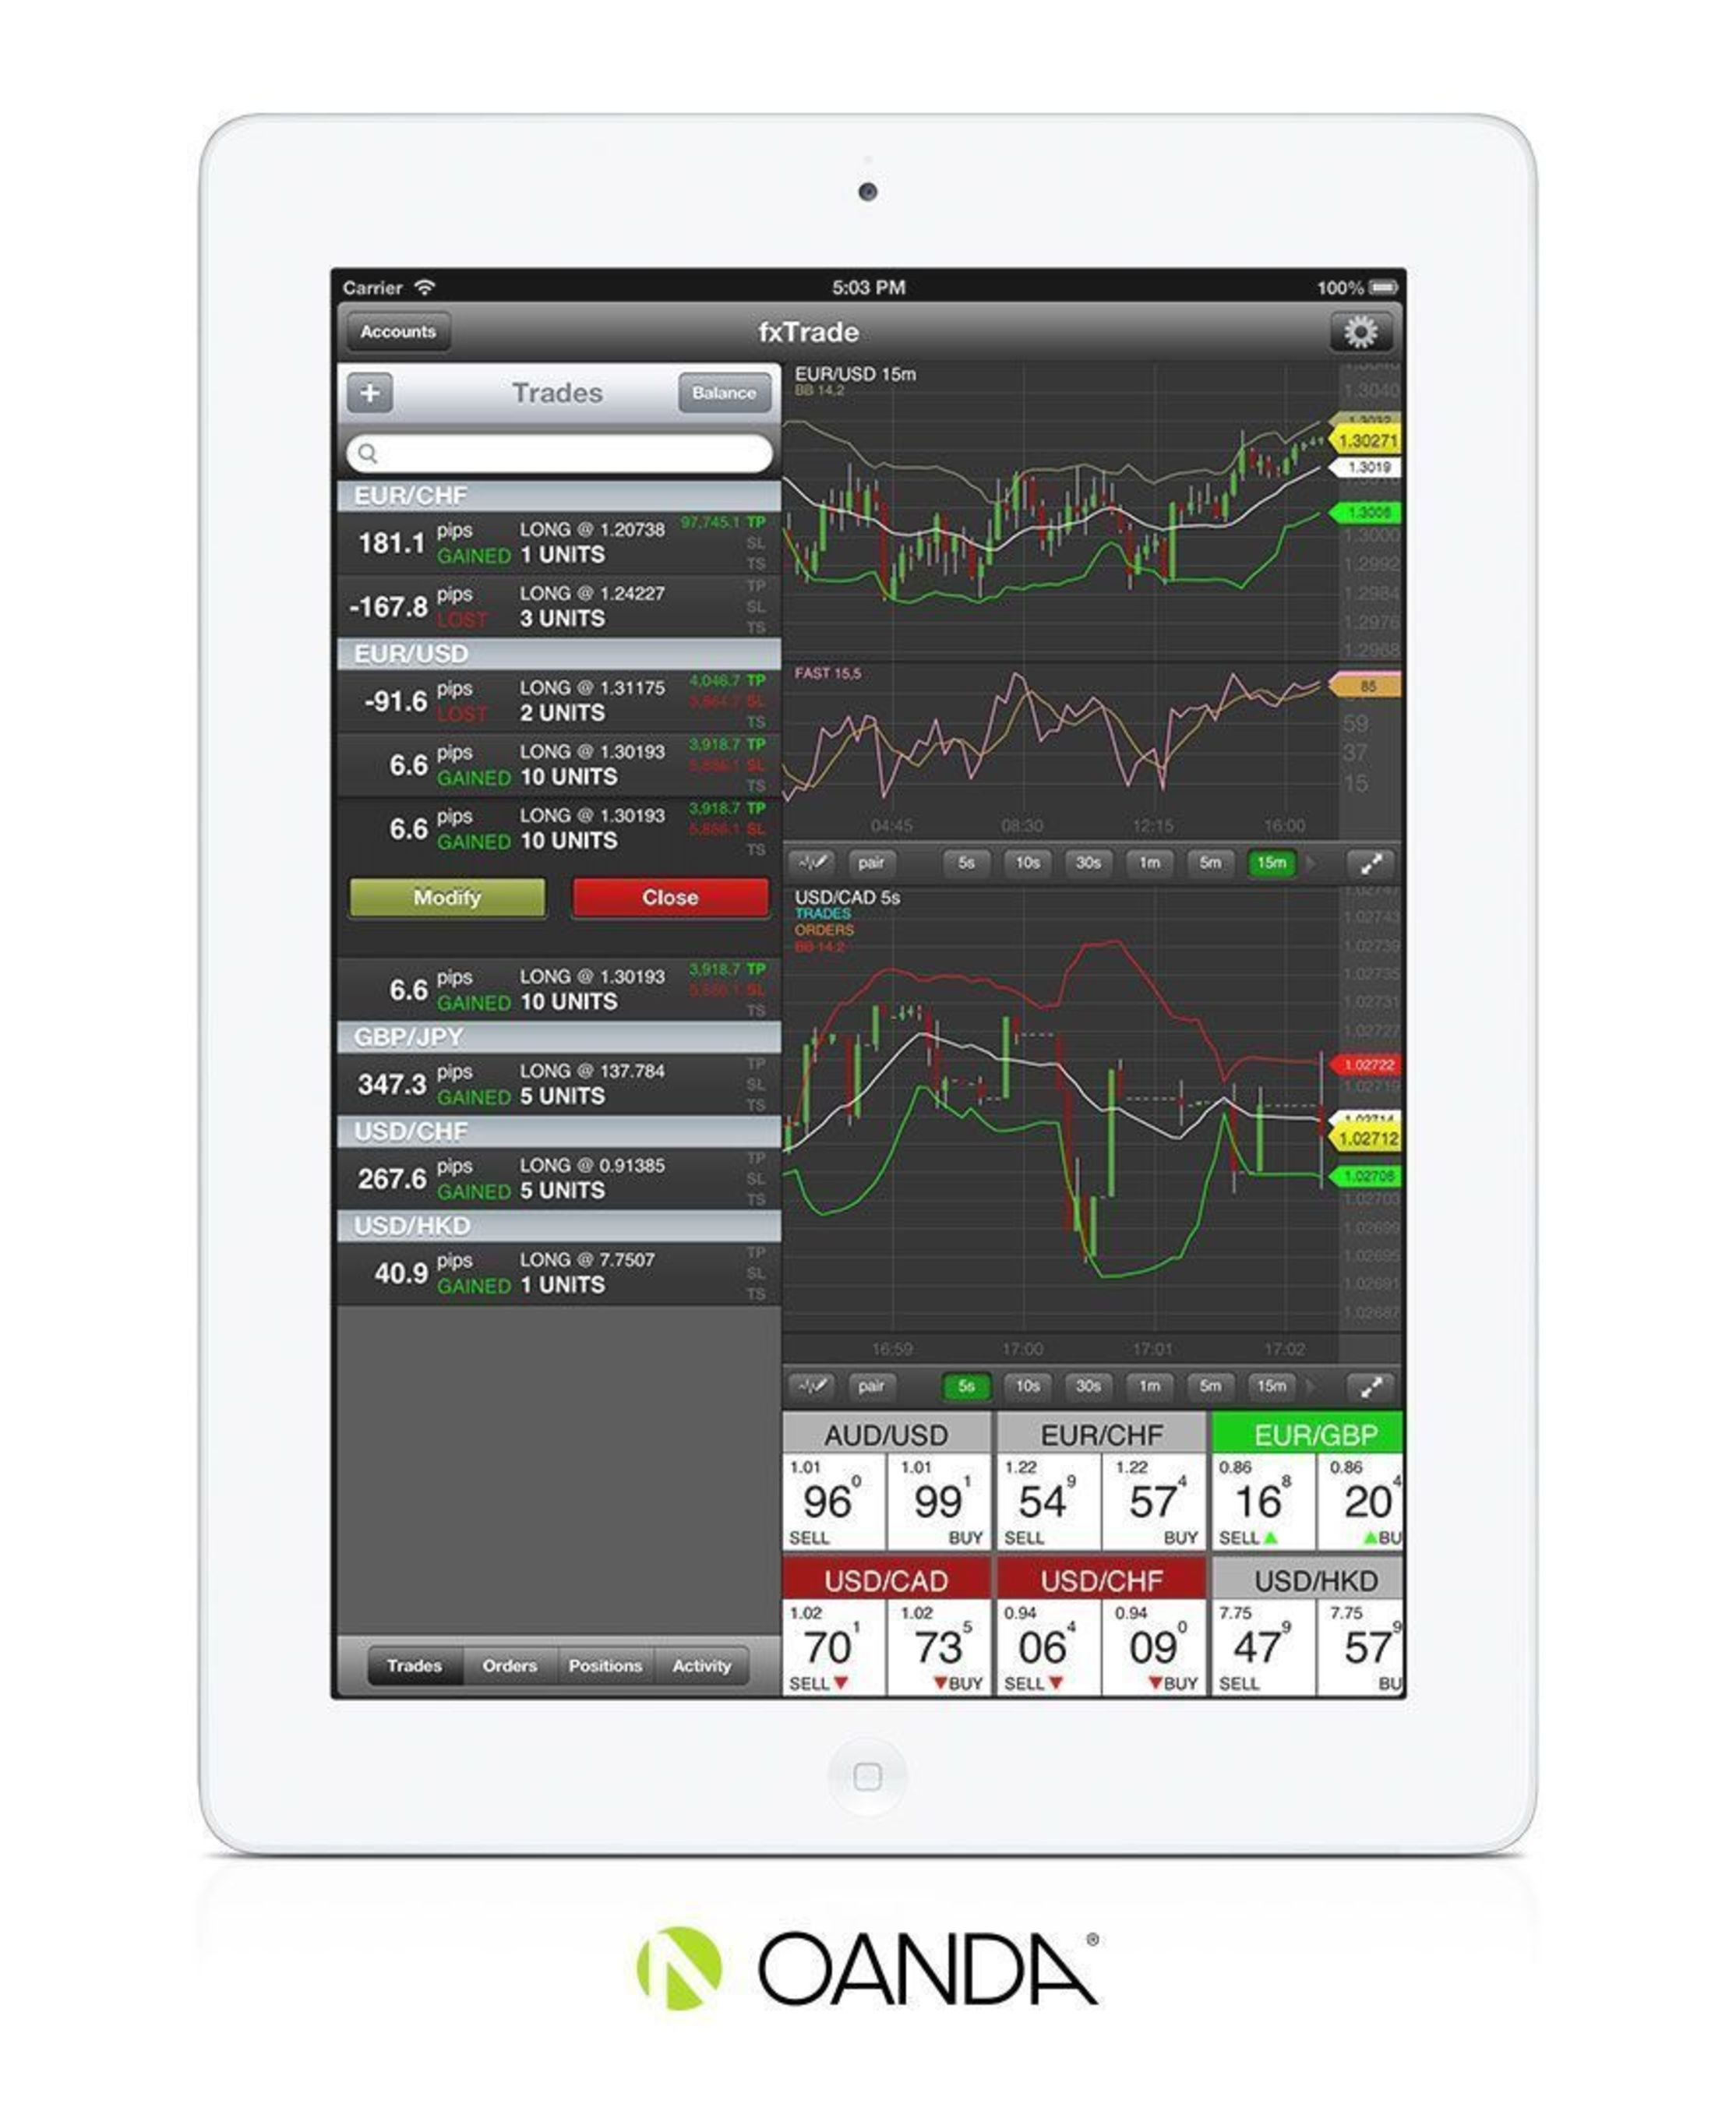 OANDA's free mobile trading app allows users to quickly view forex market activity, manage positions, control risk, and monitor account status and P&L while on the go. (PRNewsFoto/OANDA)